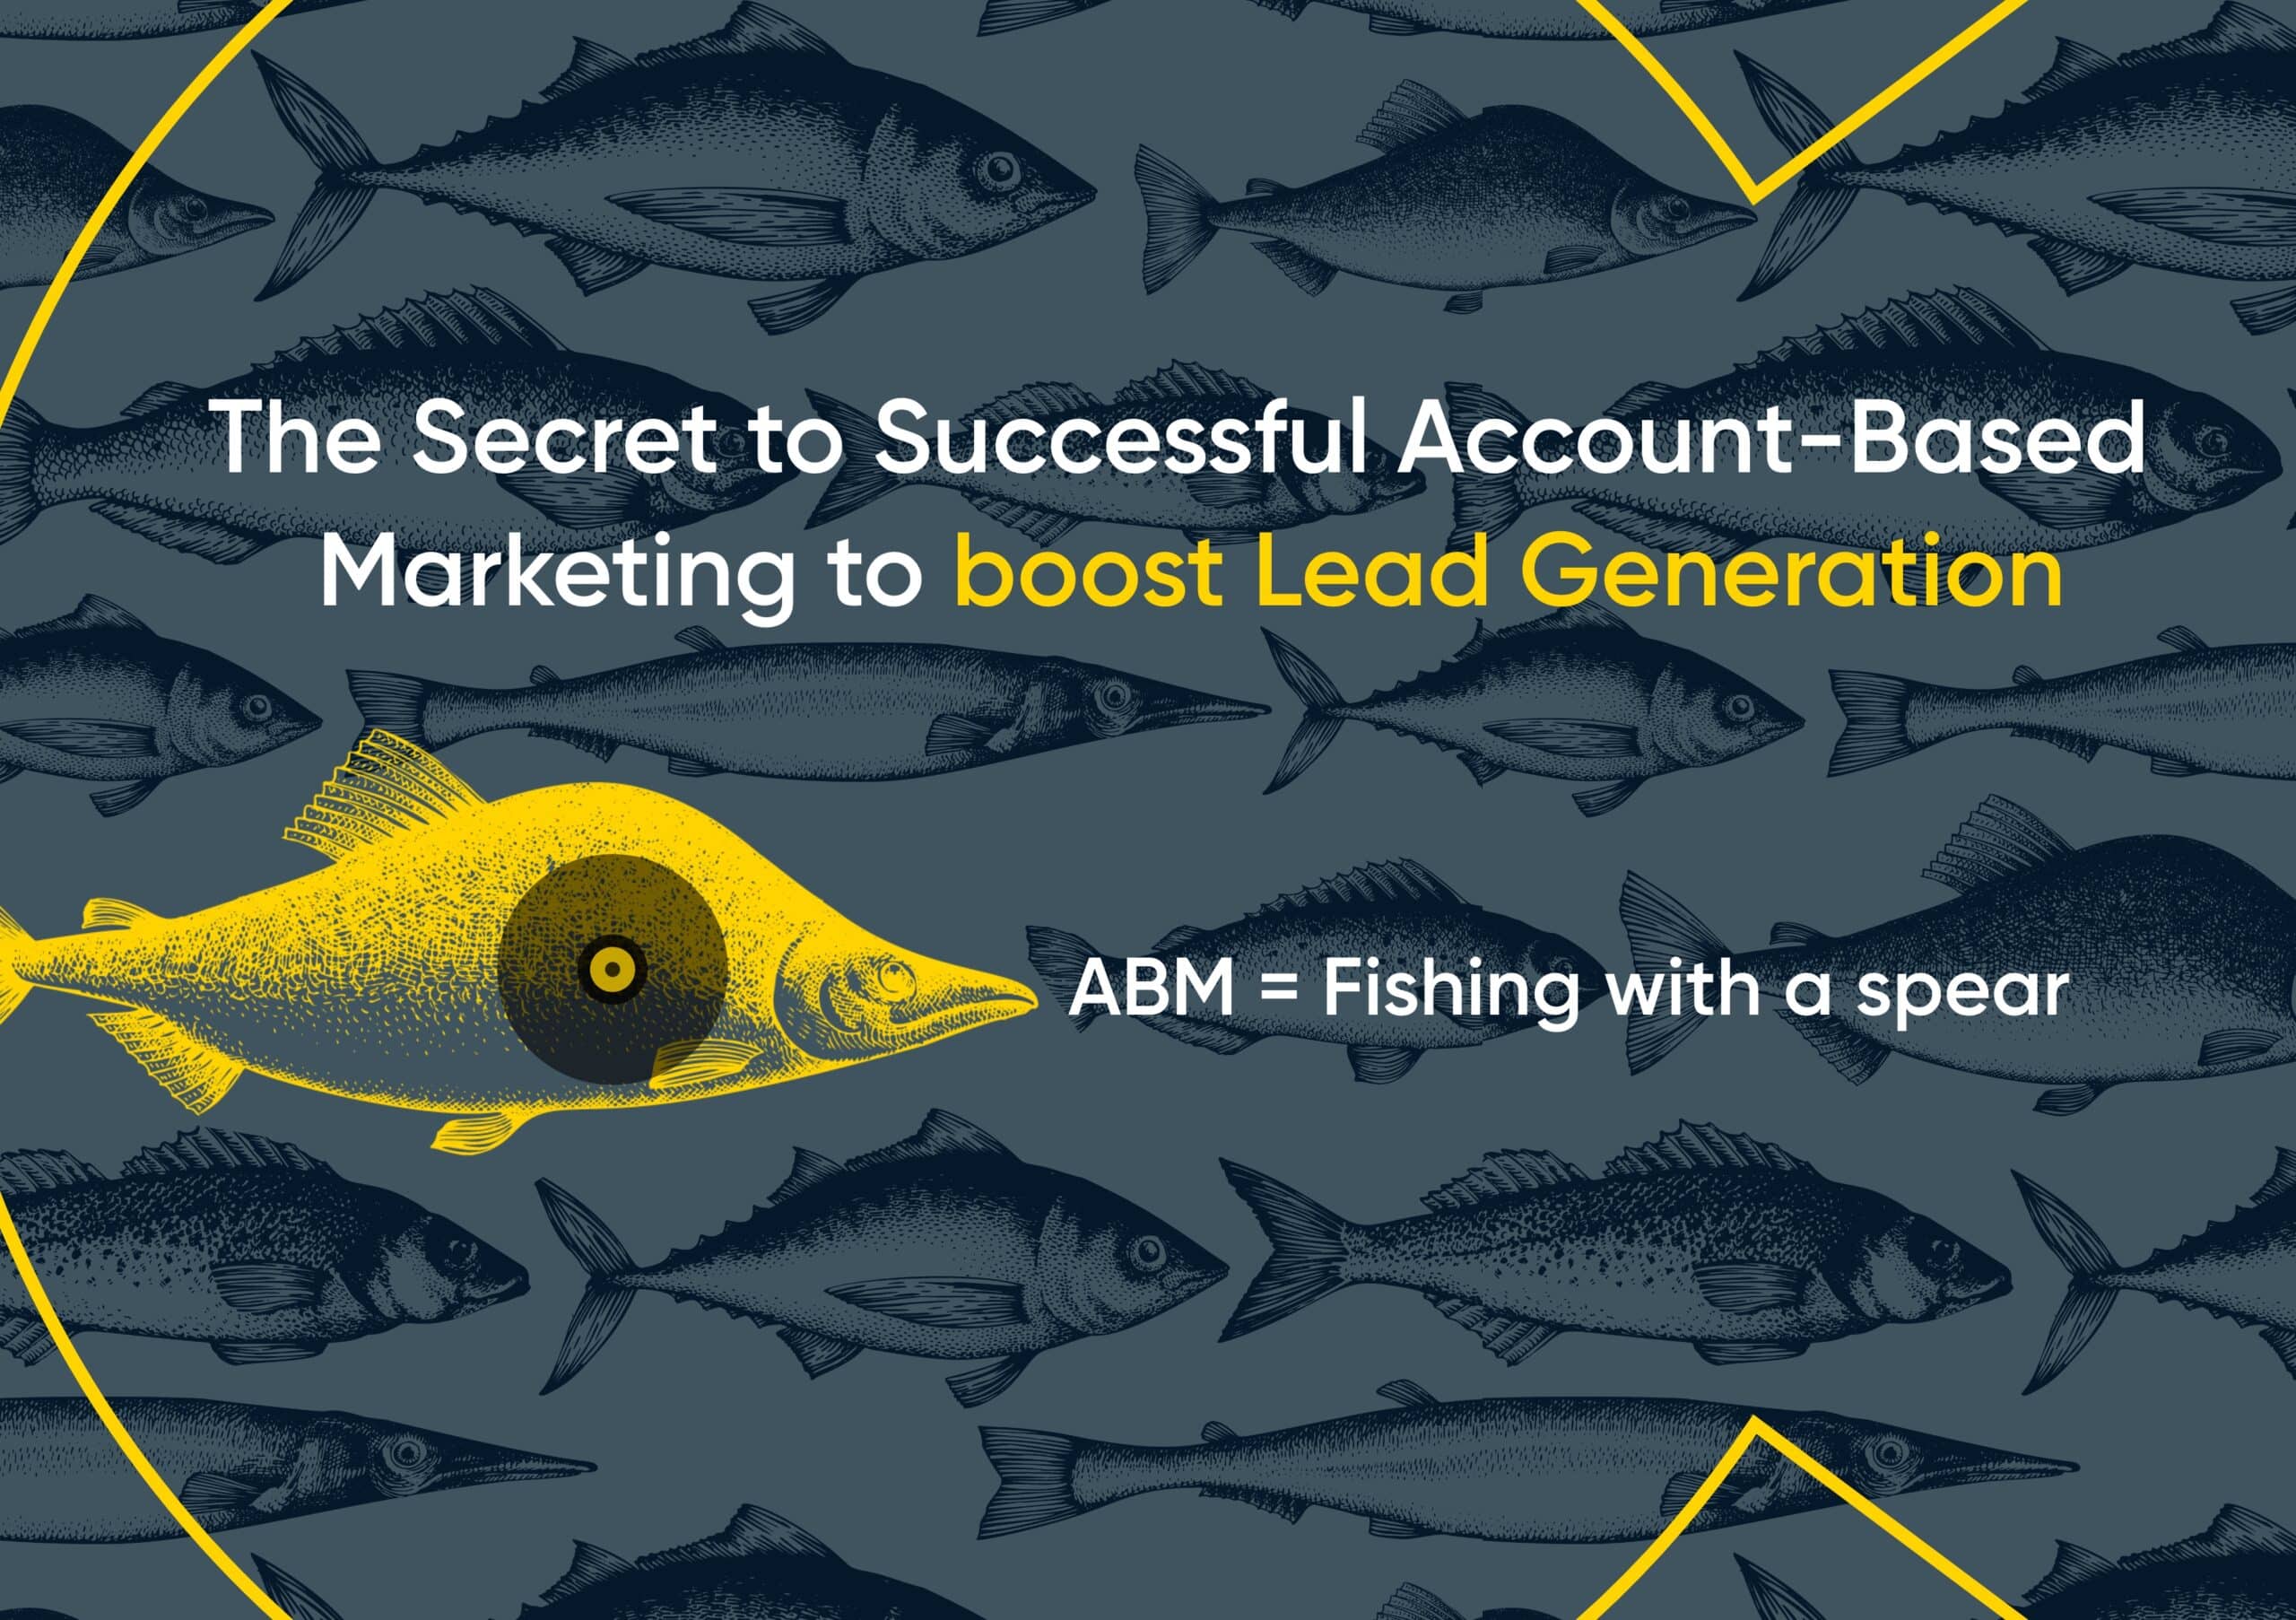 ABM agency and boosting Lead Generation.